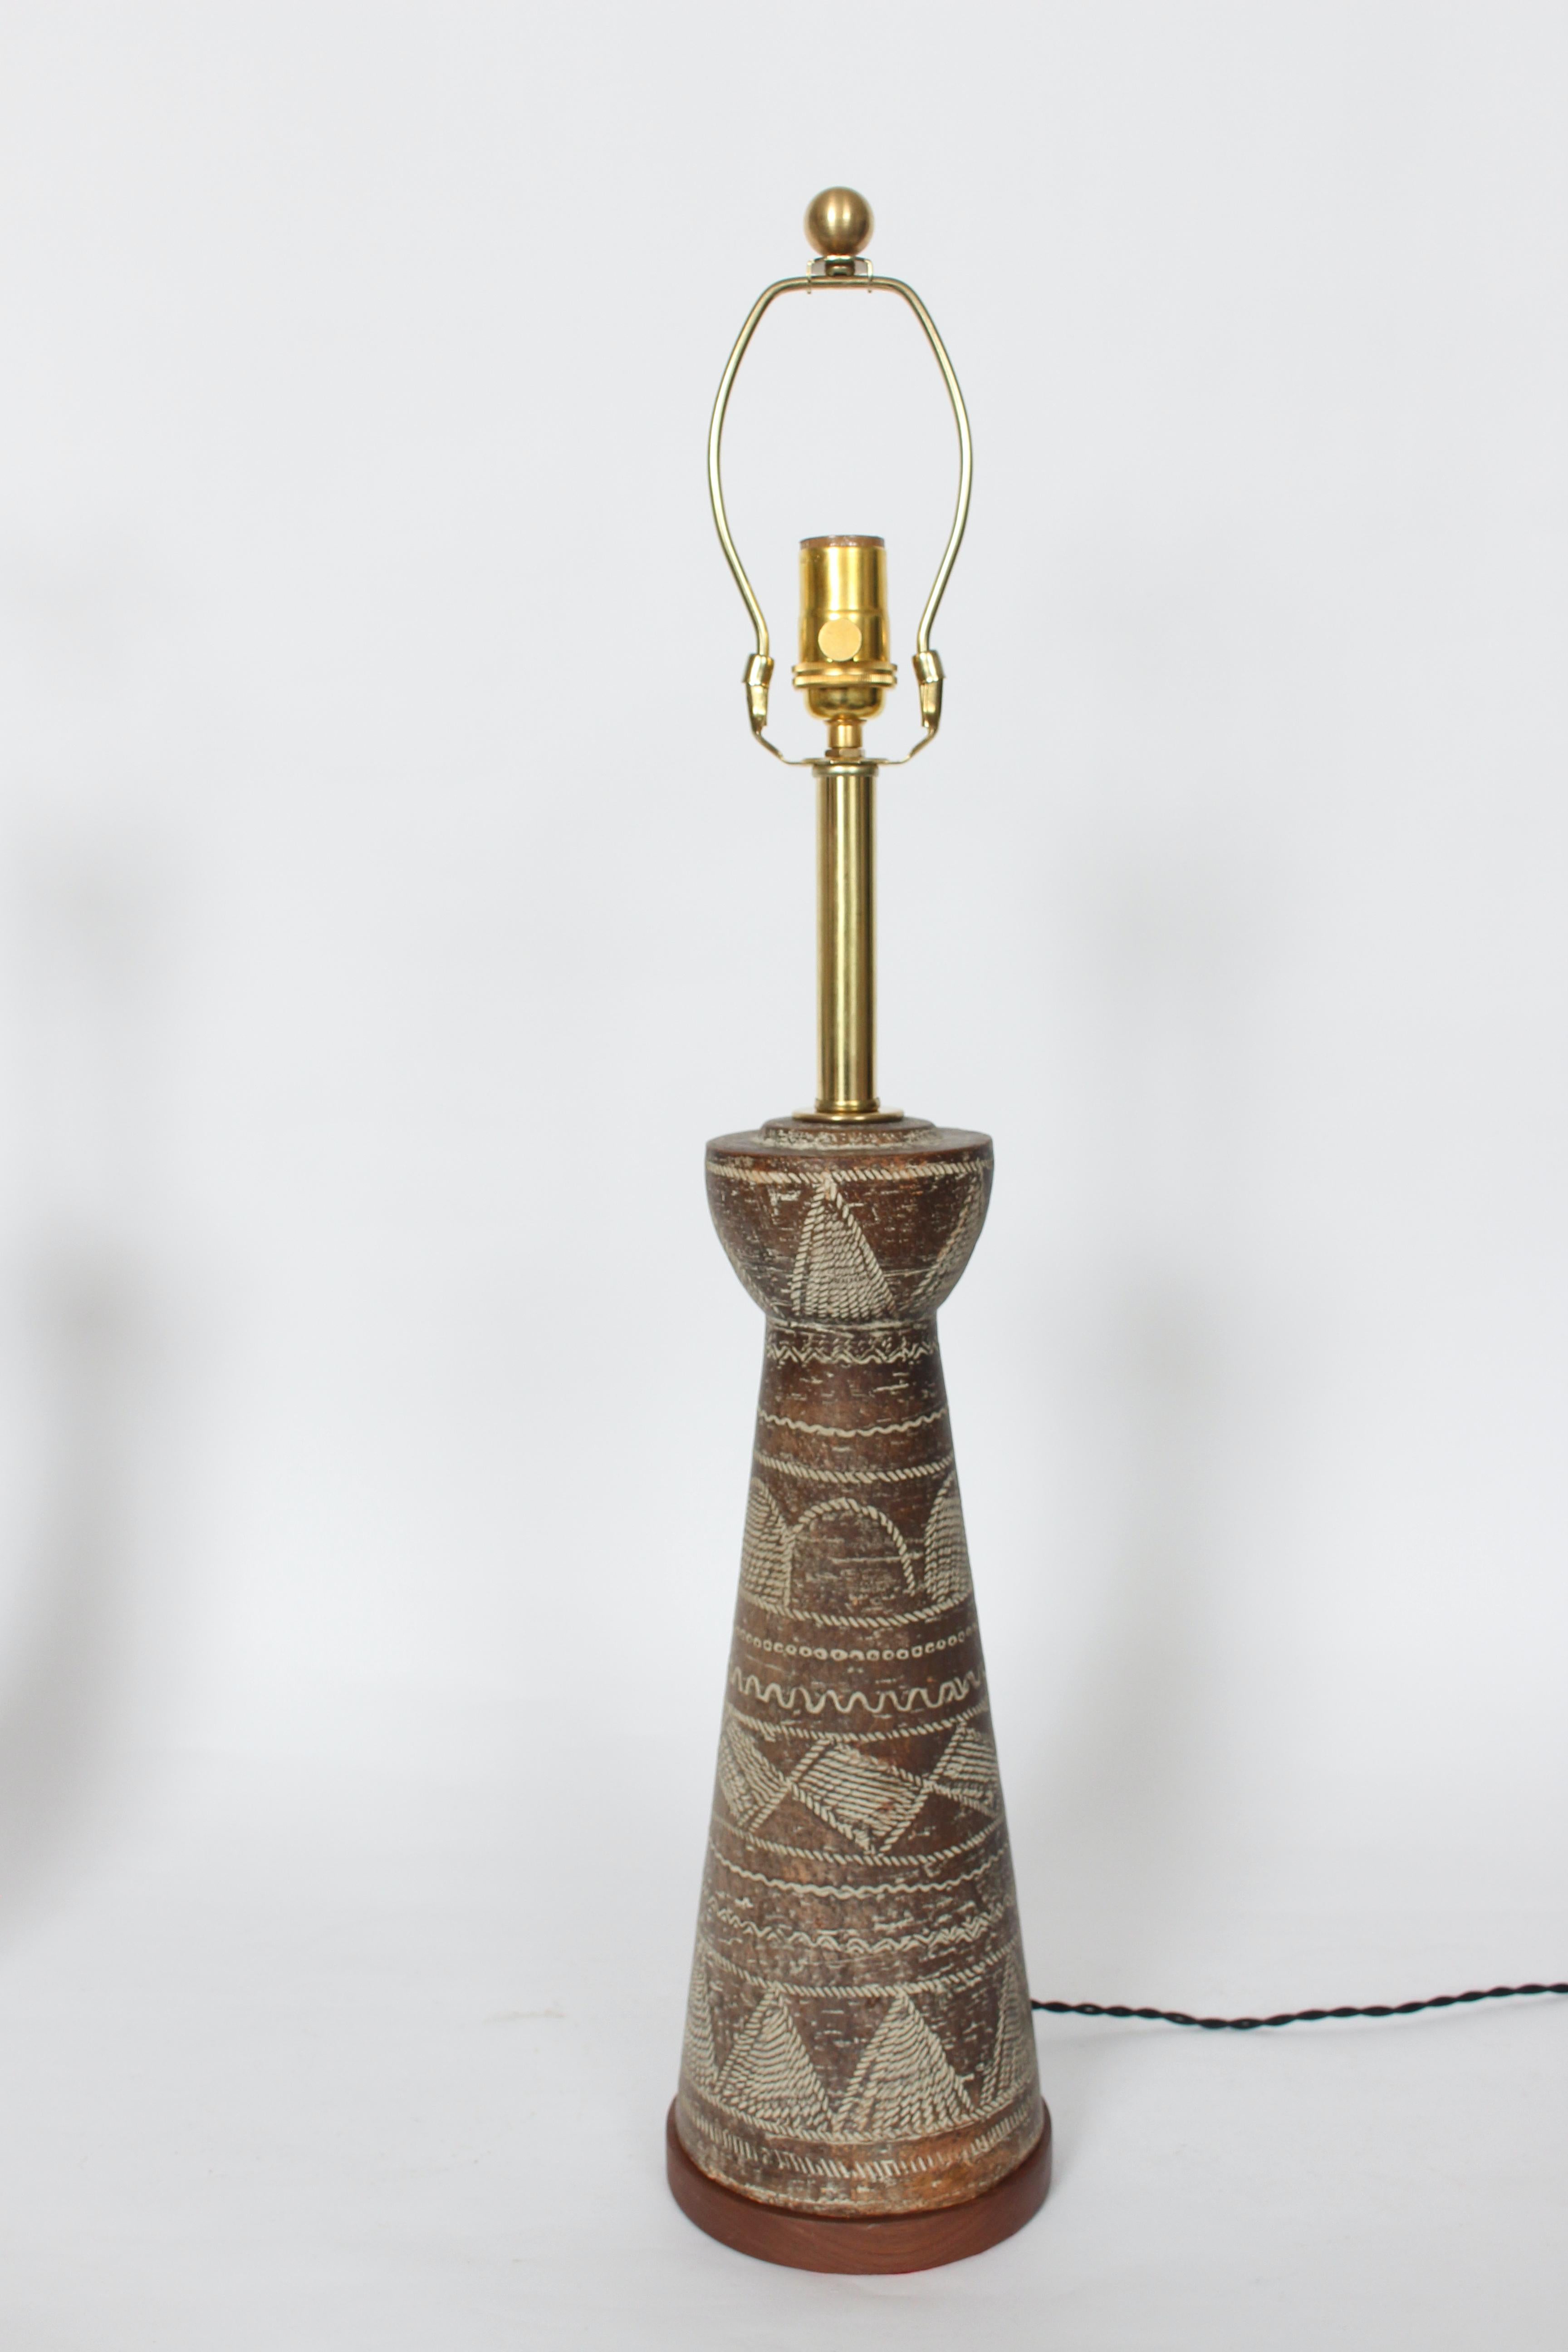 Pair of Ugo Zaccagnini Incised Tribal Table Lamps in Brown & Cream, 1950s In Good Condition For Sale In Bainbridge, NY